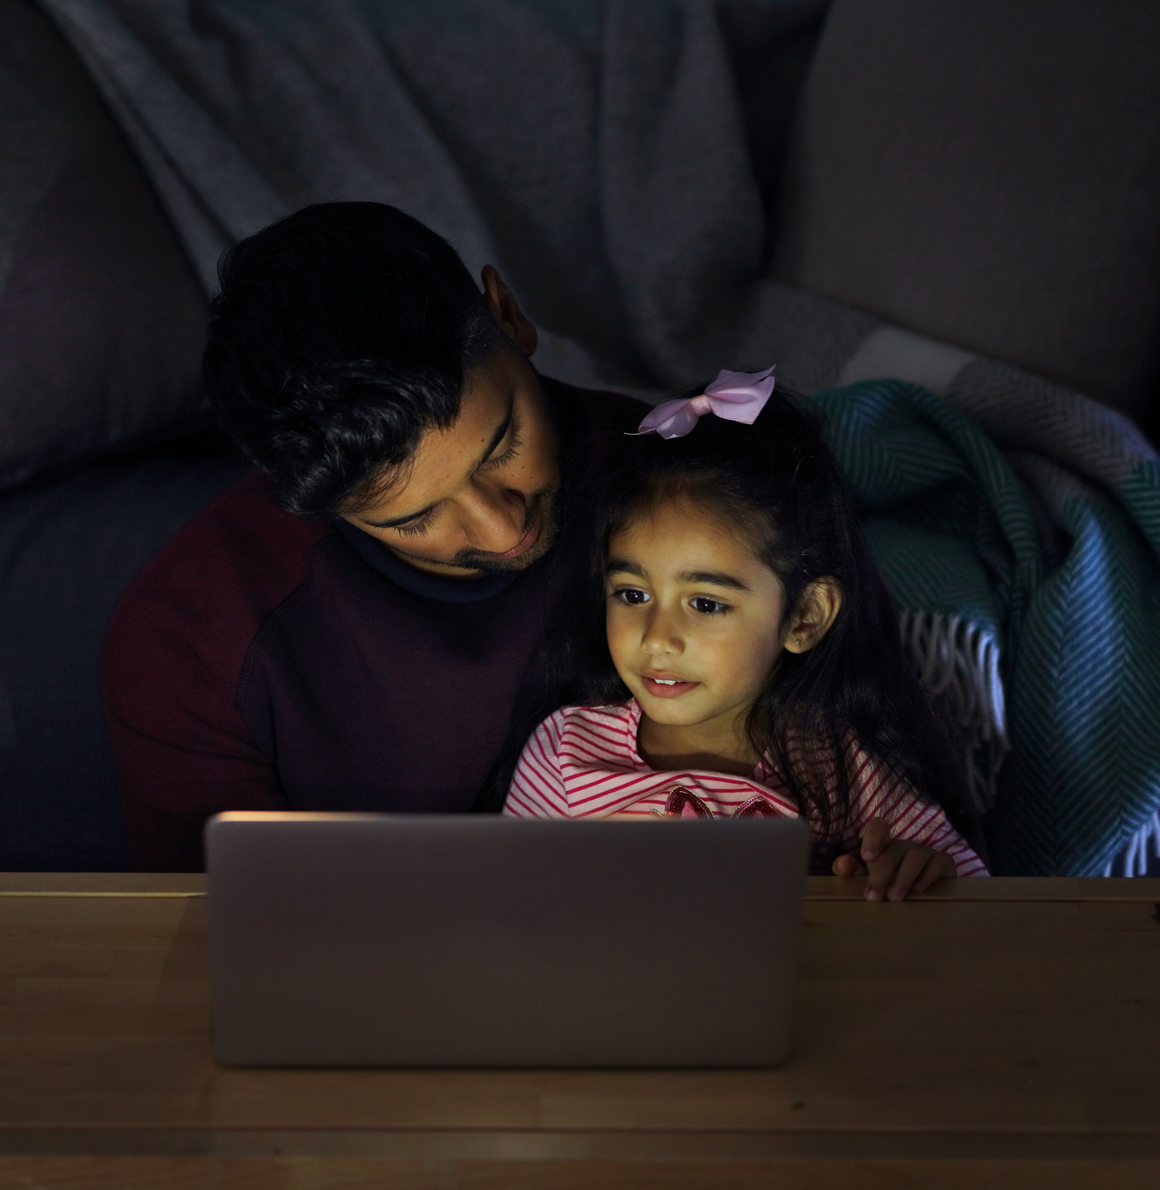 Father and daughter using a laptop